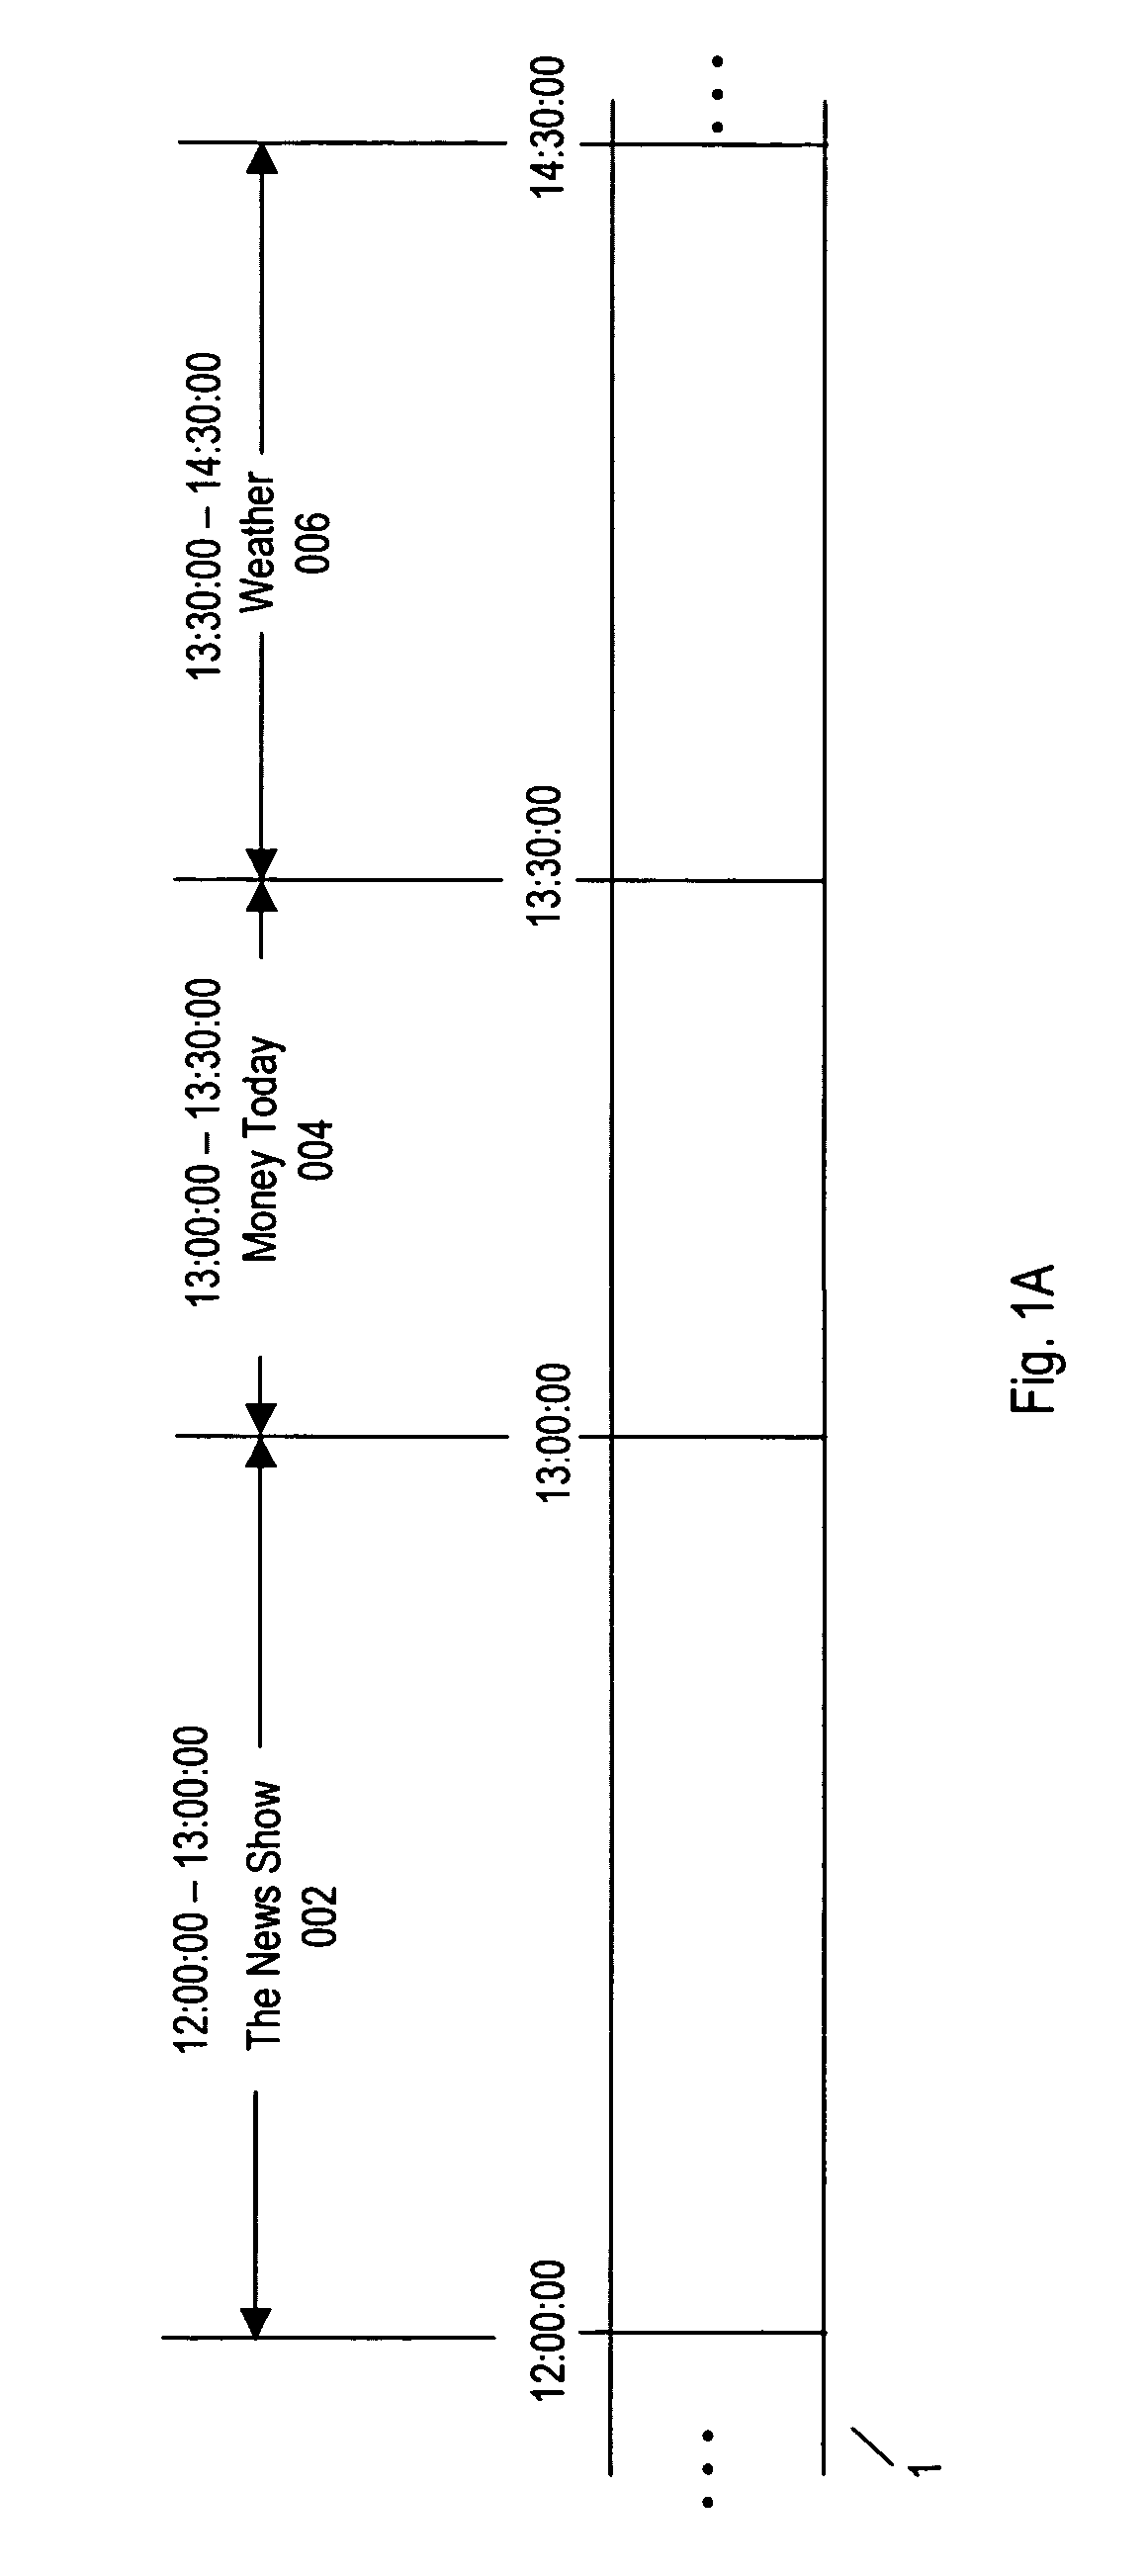 Programming content capturing and processing system and method